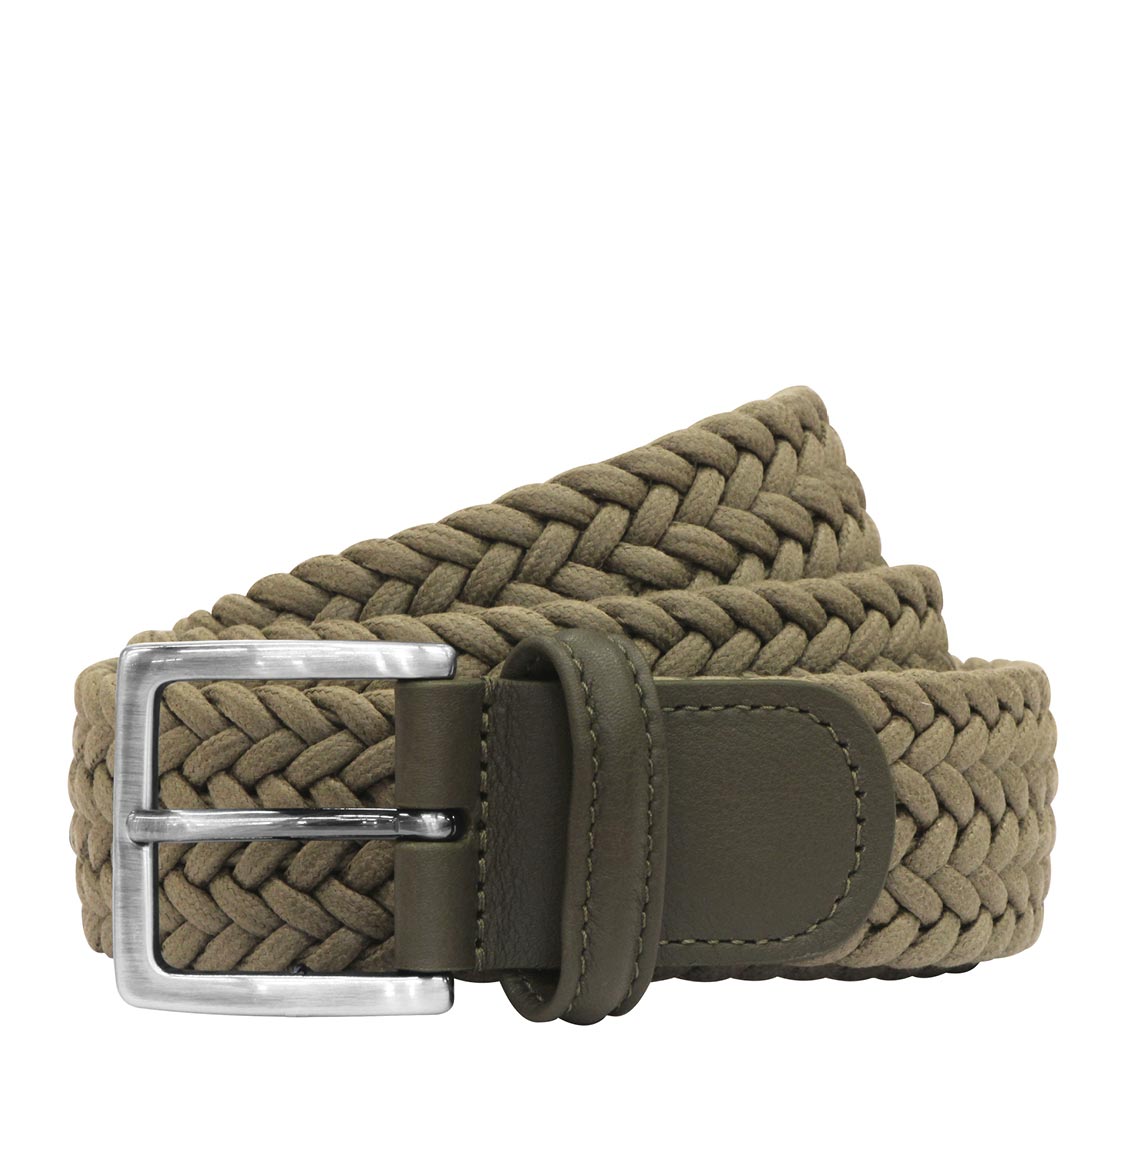 Anderson’s Ζώνη Waxed Leather-Trimmed Woven Belt Khaki